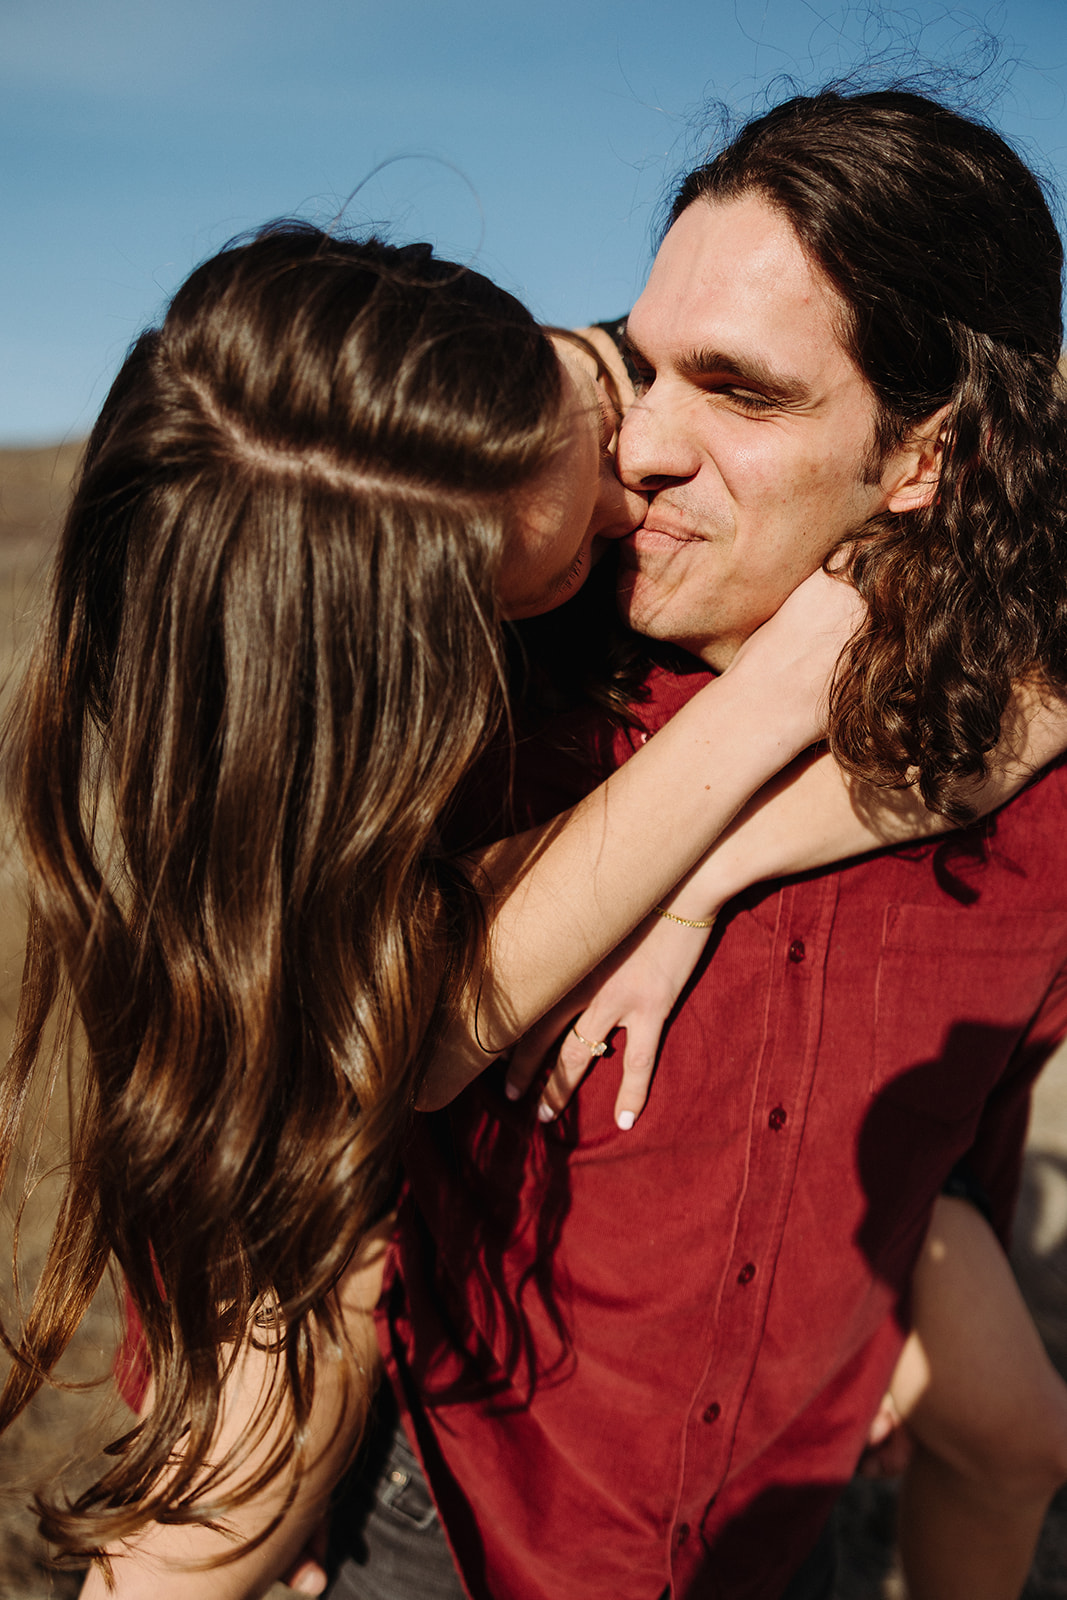 man smiling while his fiance kisses her cheek 